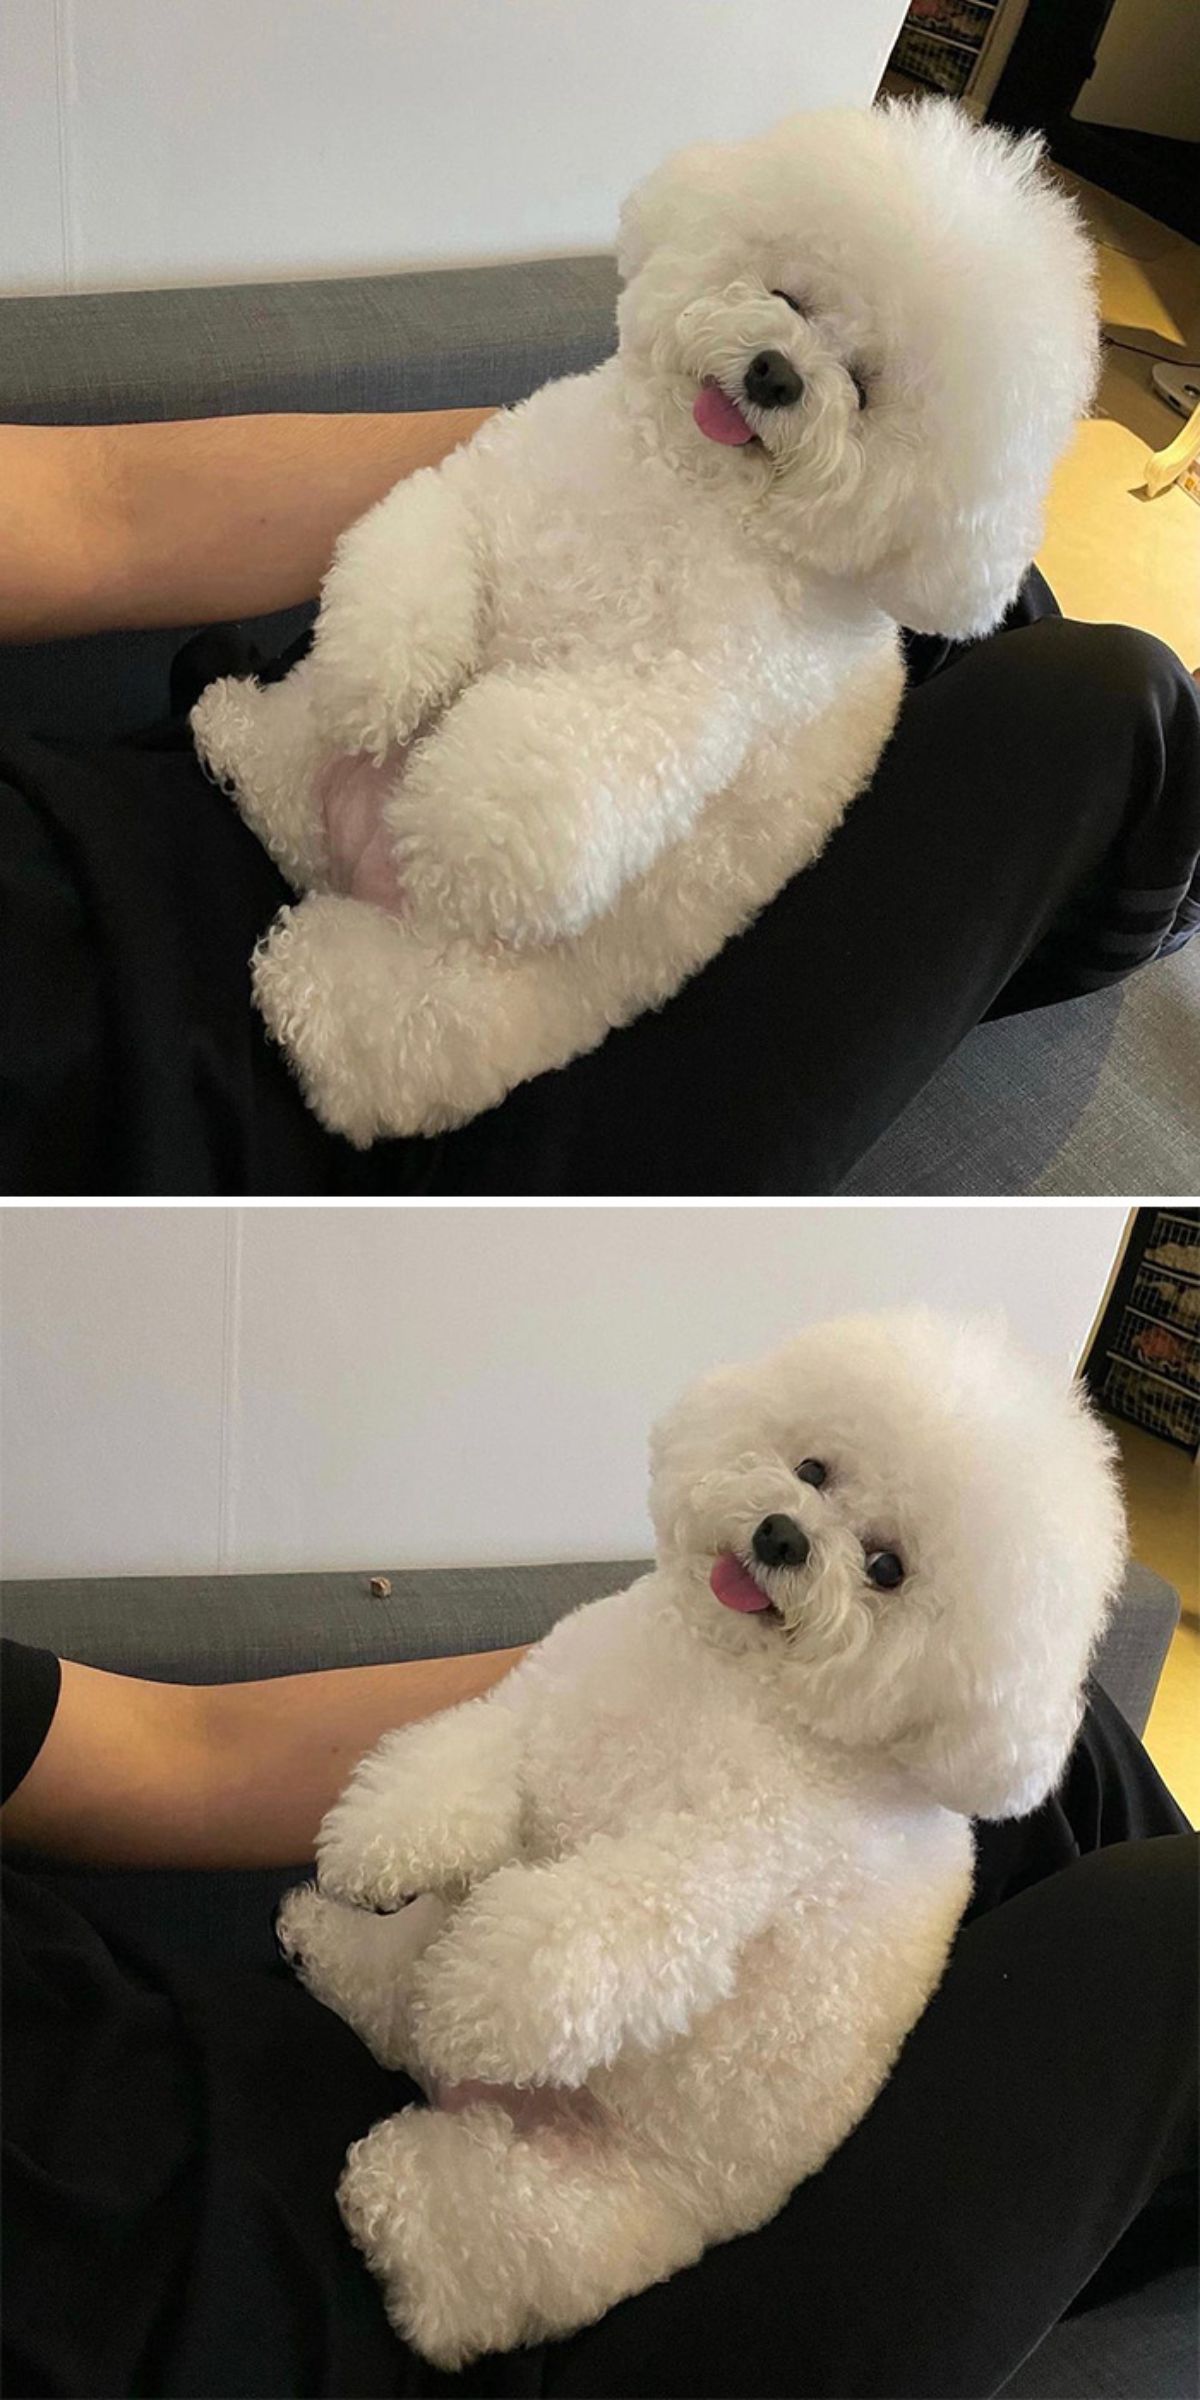 2 photos of a small fluffy white dog laying back against a black sofa